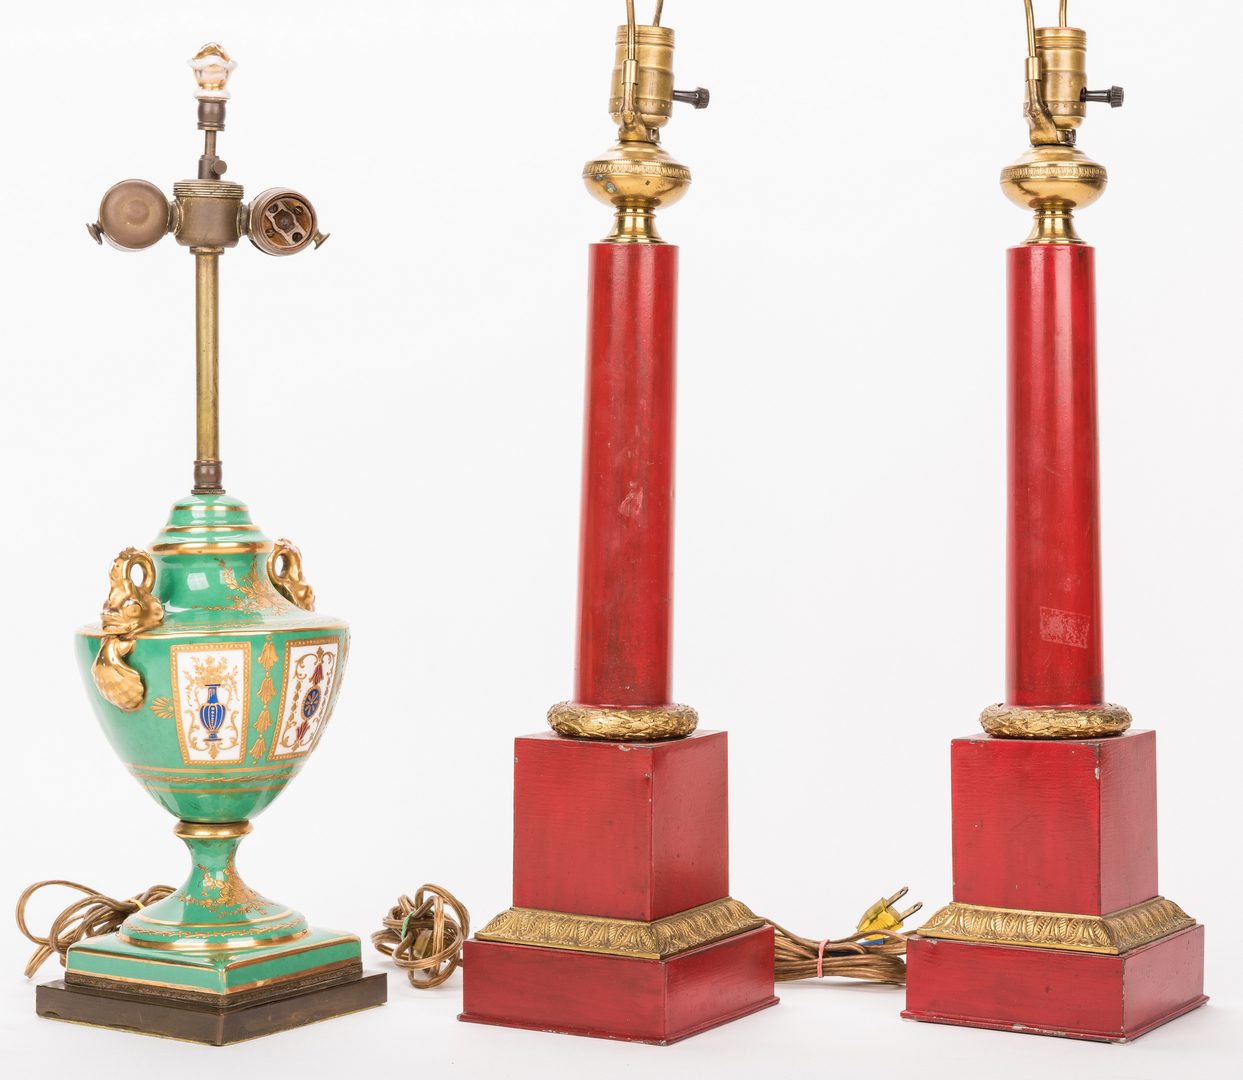 Lot 418: 3 French Lamps, Pair of Empire Tole & 1 Porcelain